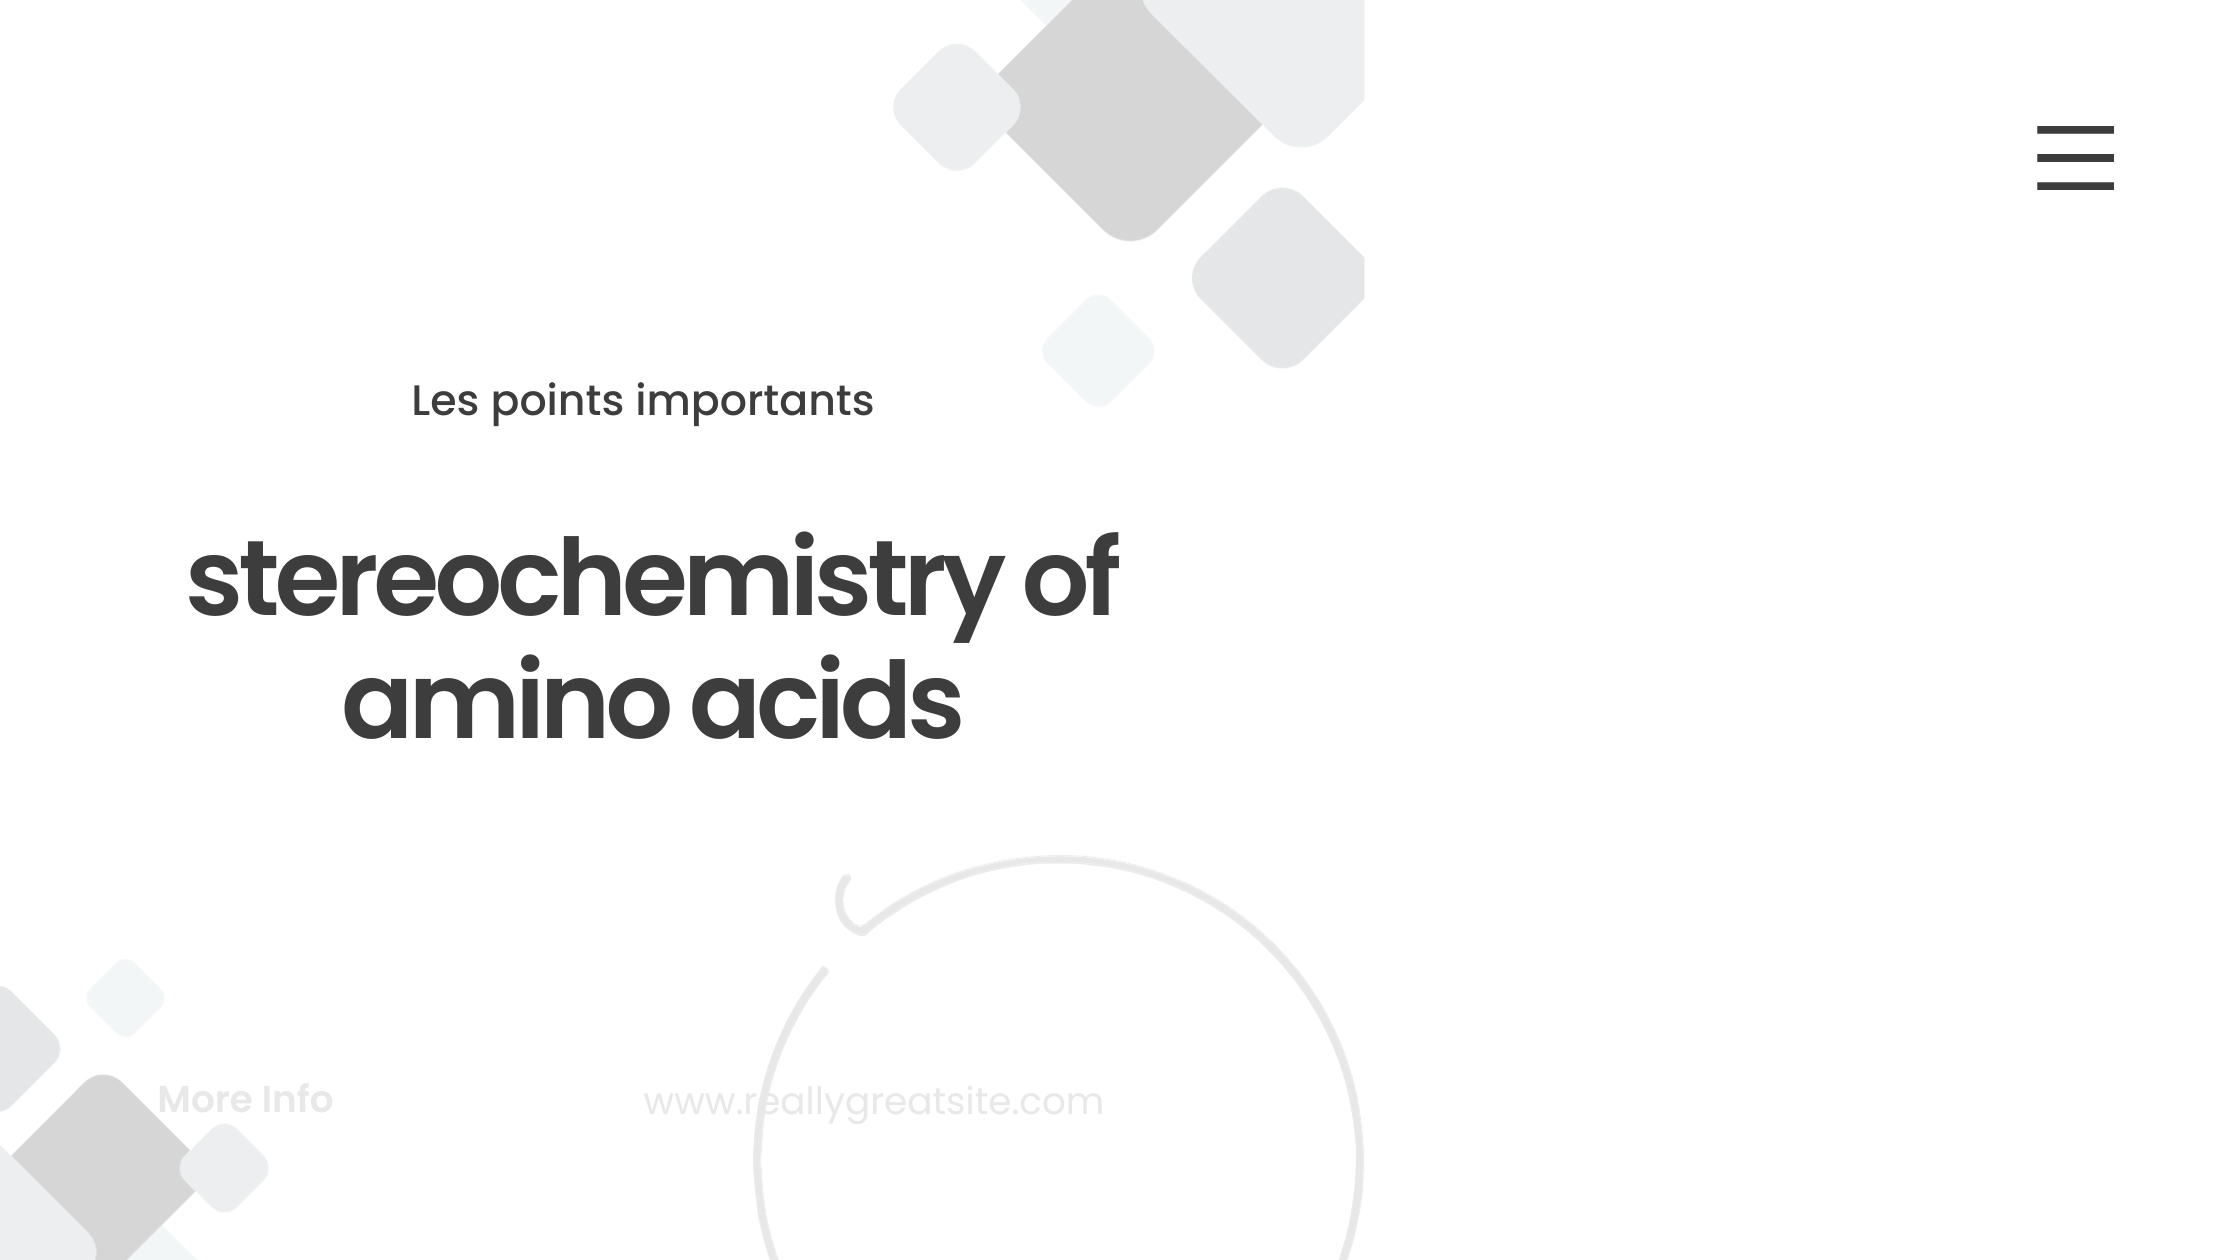 stereochemistry of amino acids | Les points importants